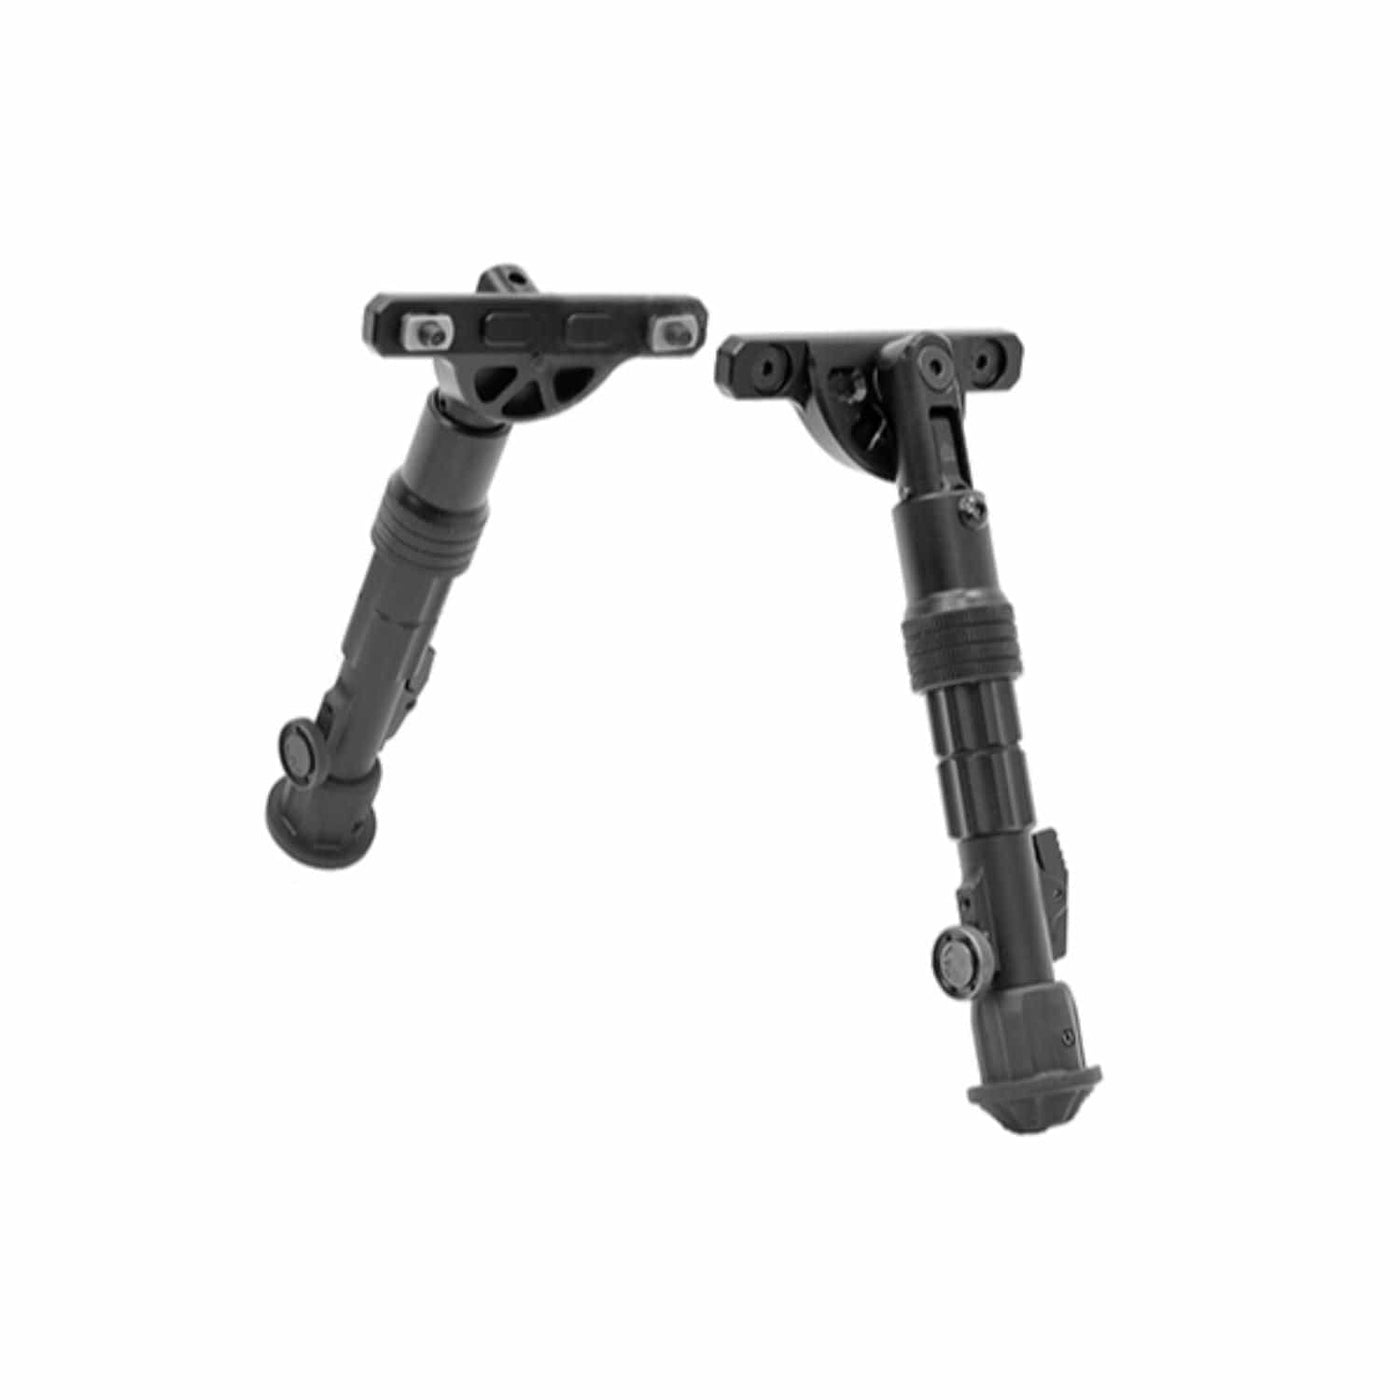 Leapers Leapers UTG Recon Flex Bipod Center Height 5.7in-8in Shooting